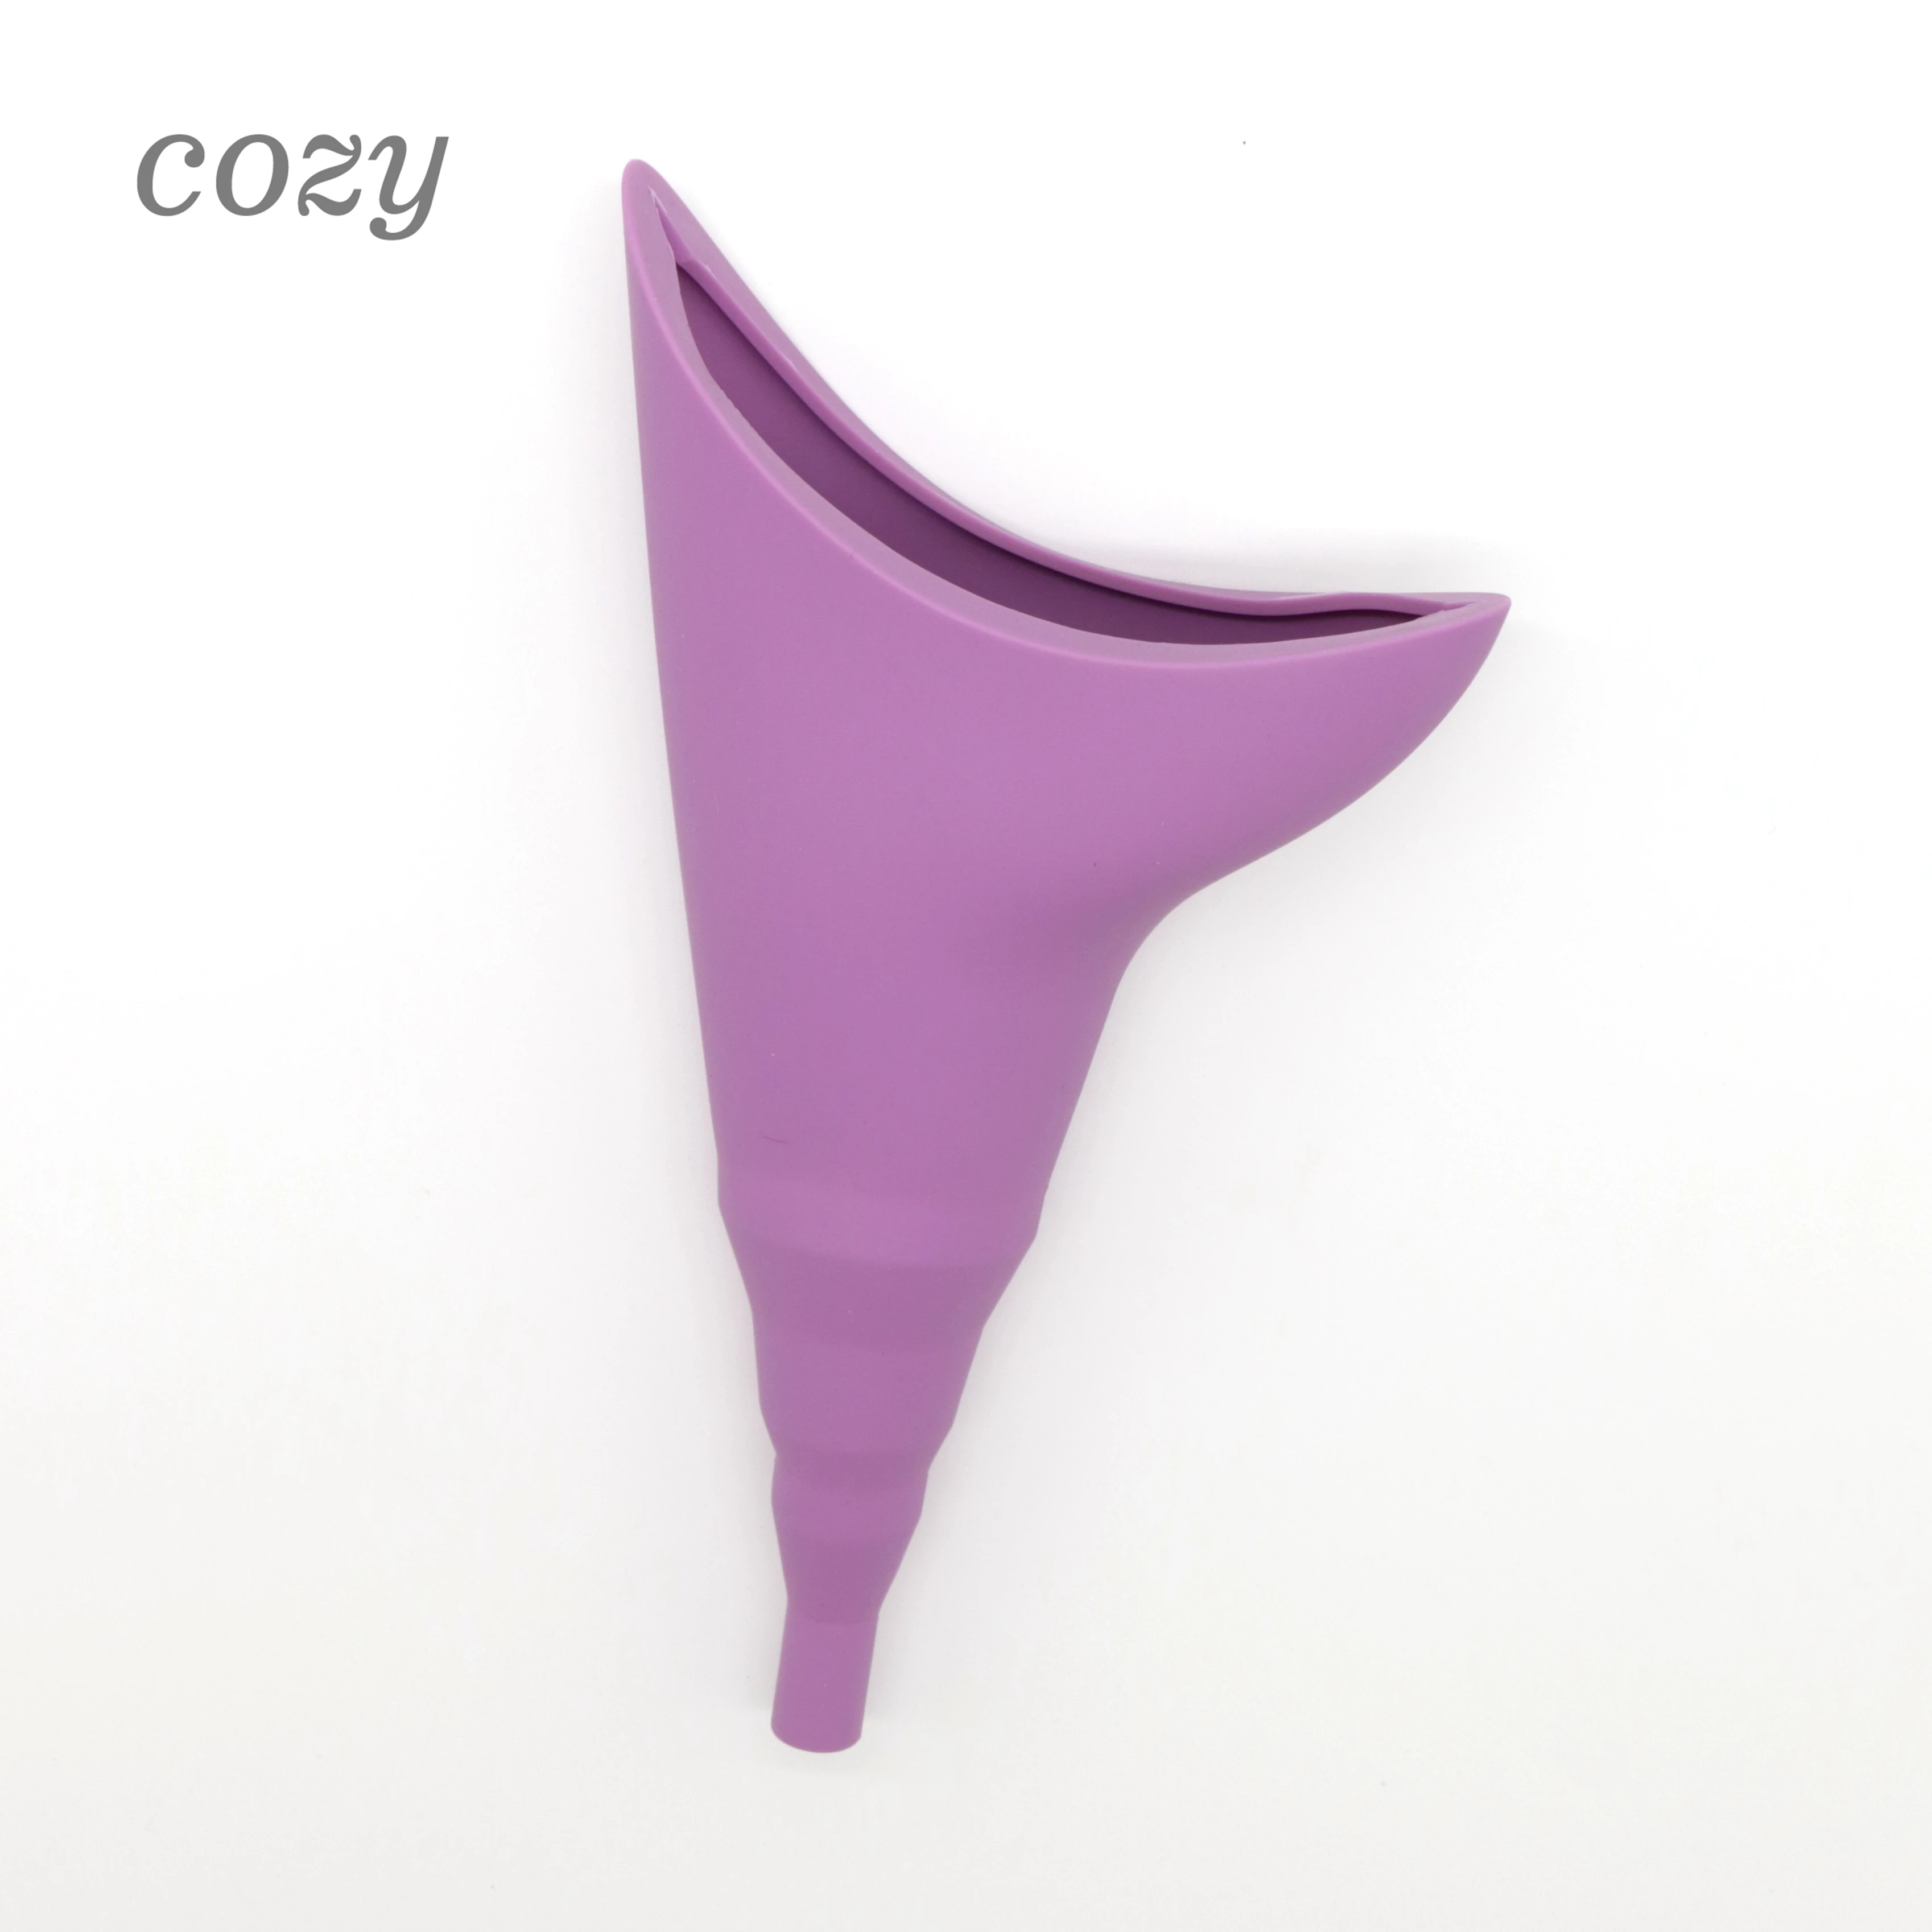 

BPA Free Upgraded 64g Portable Reusable Silicone Female Urinal Device For Women To Pee Standing Outdoor Travel Purple, Custom